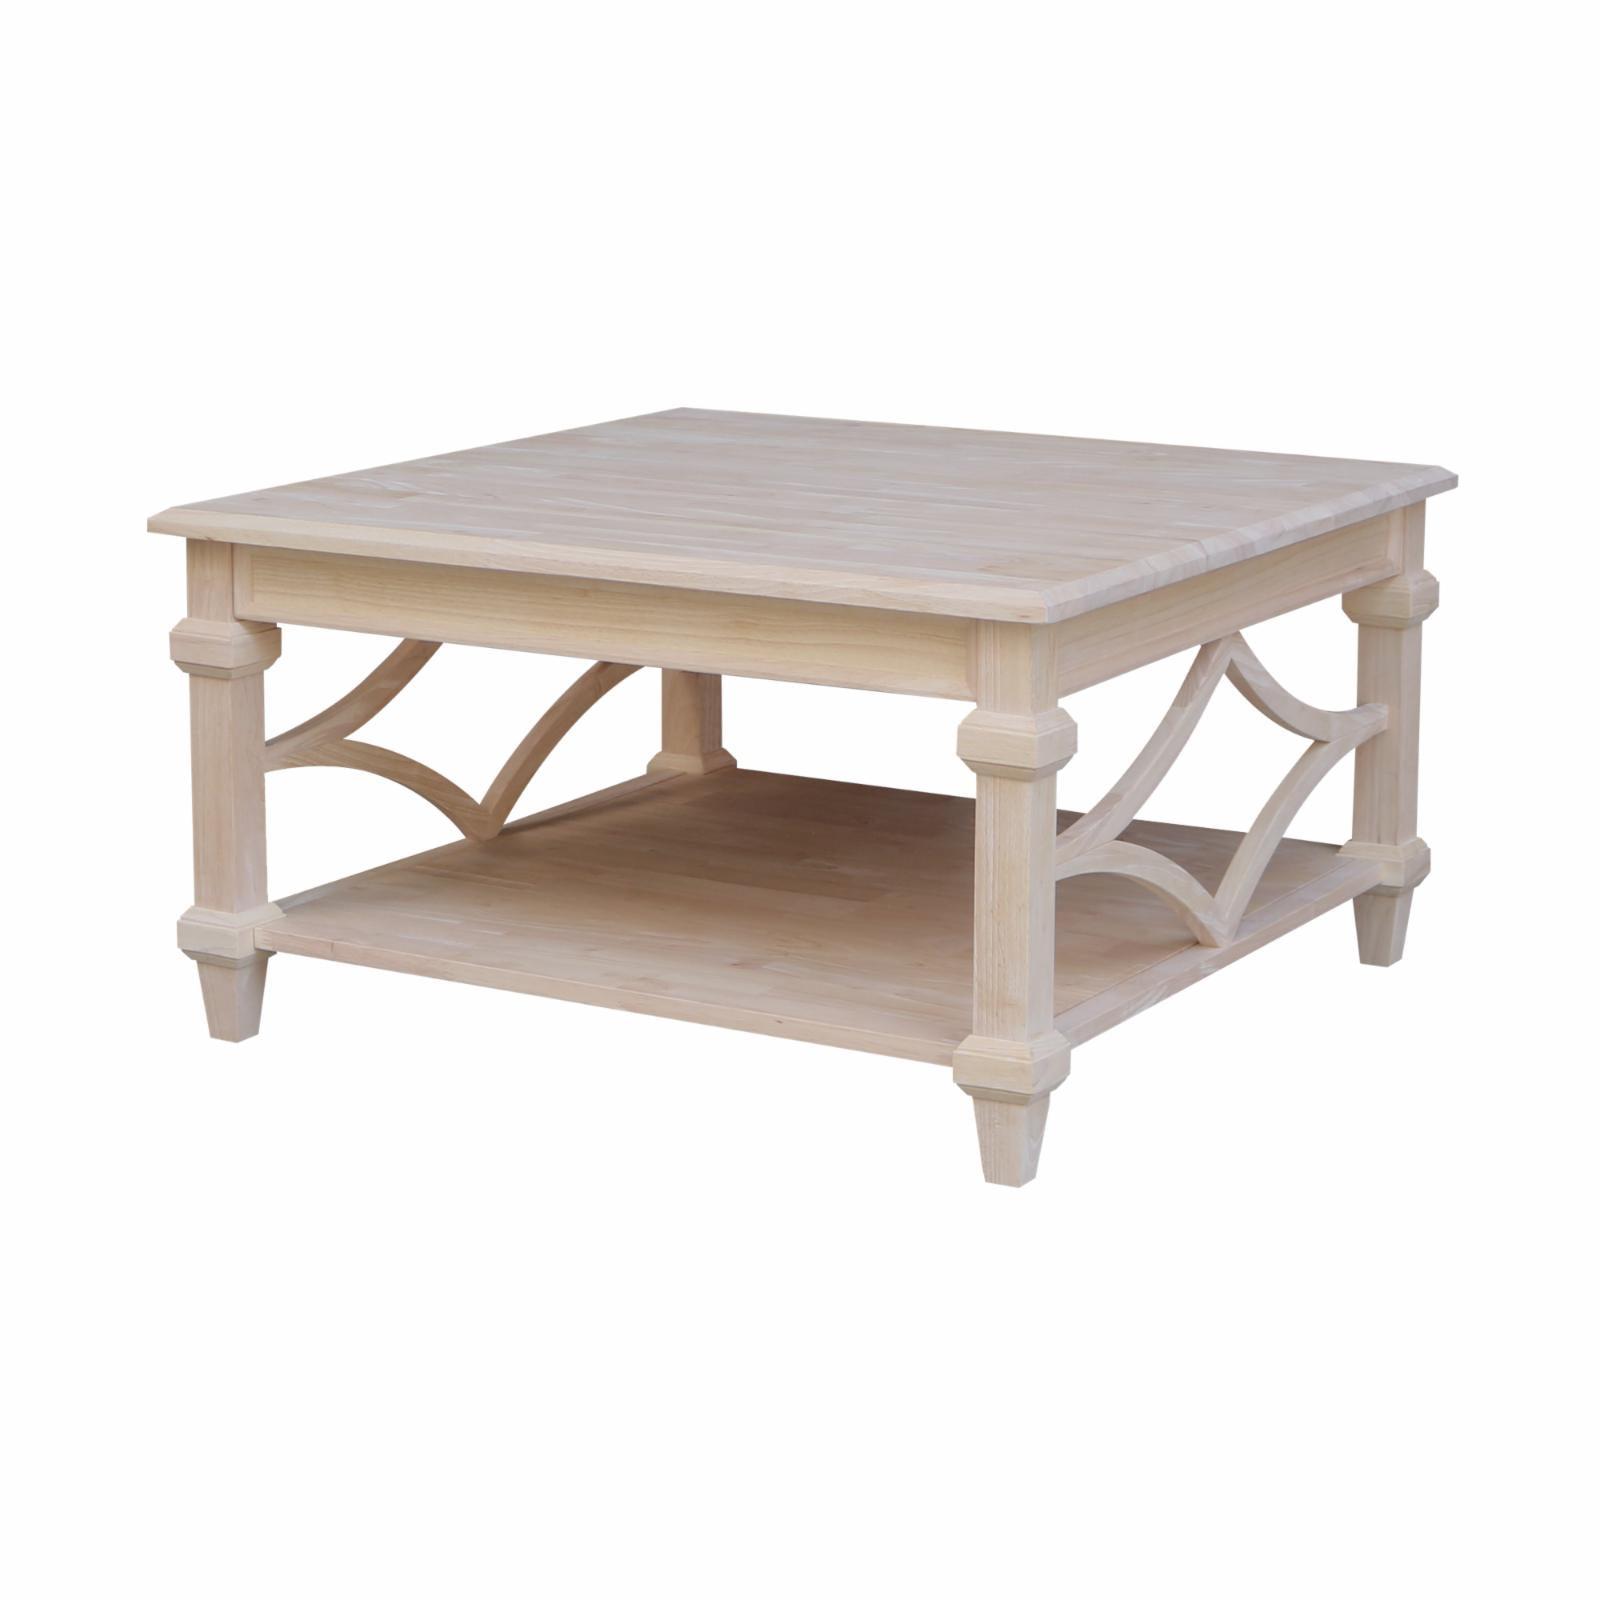 Josephine Traditional Square Solid Wood Coffee Table - 36"